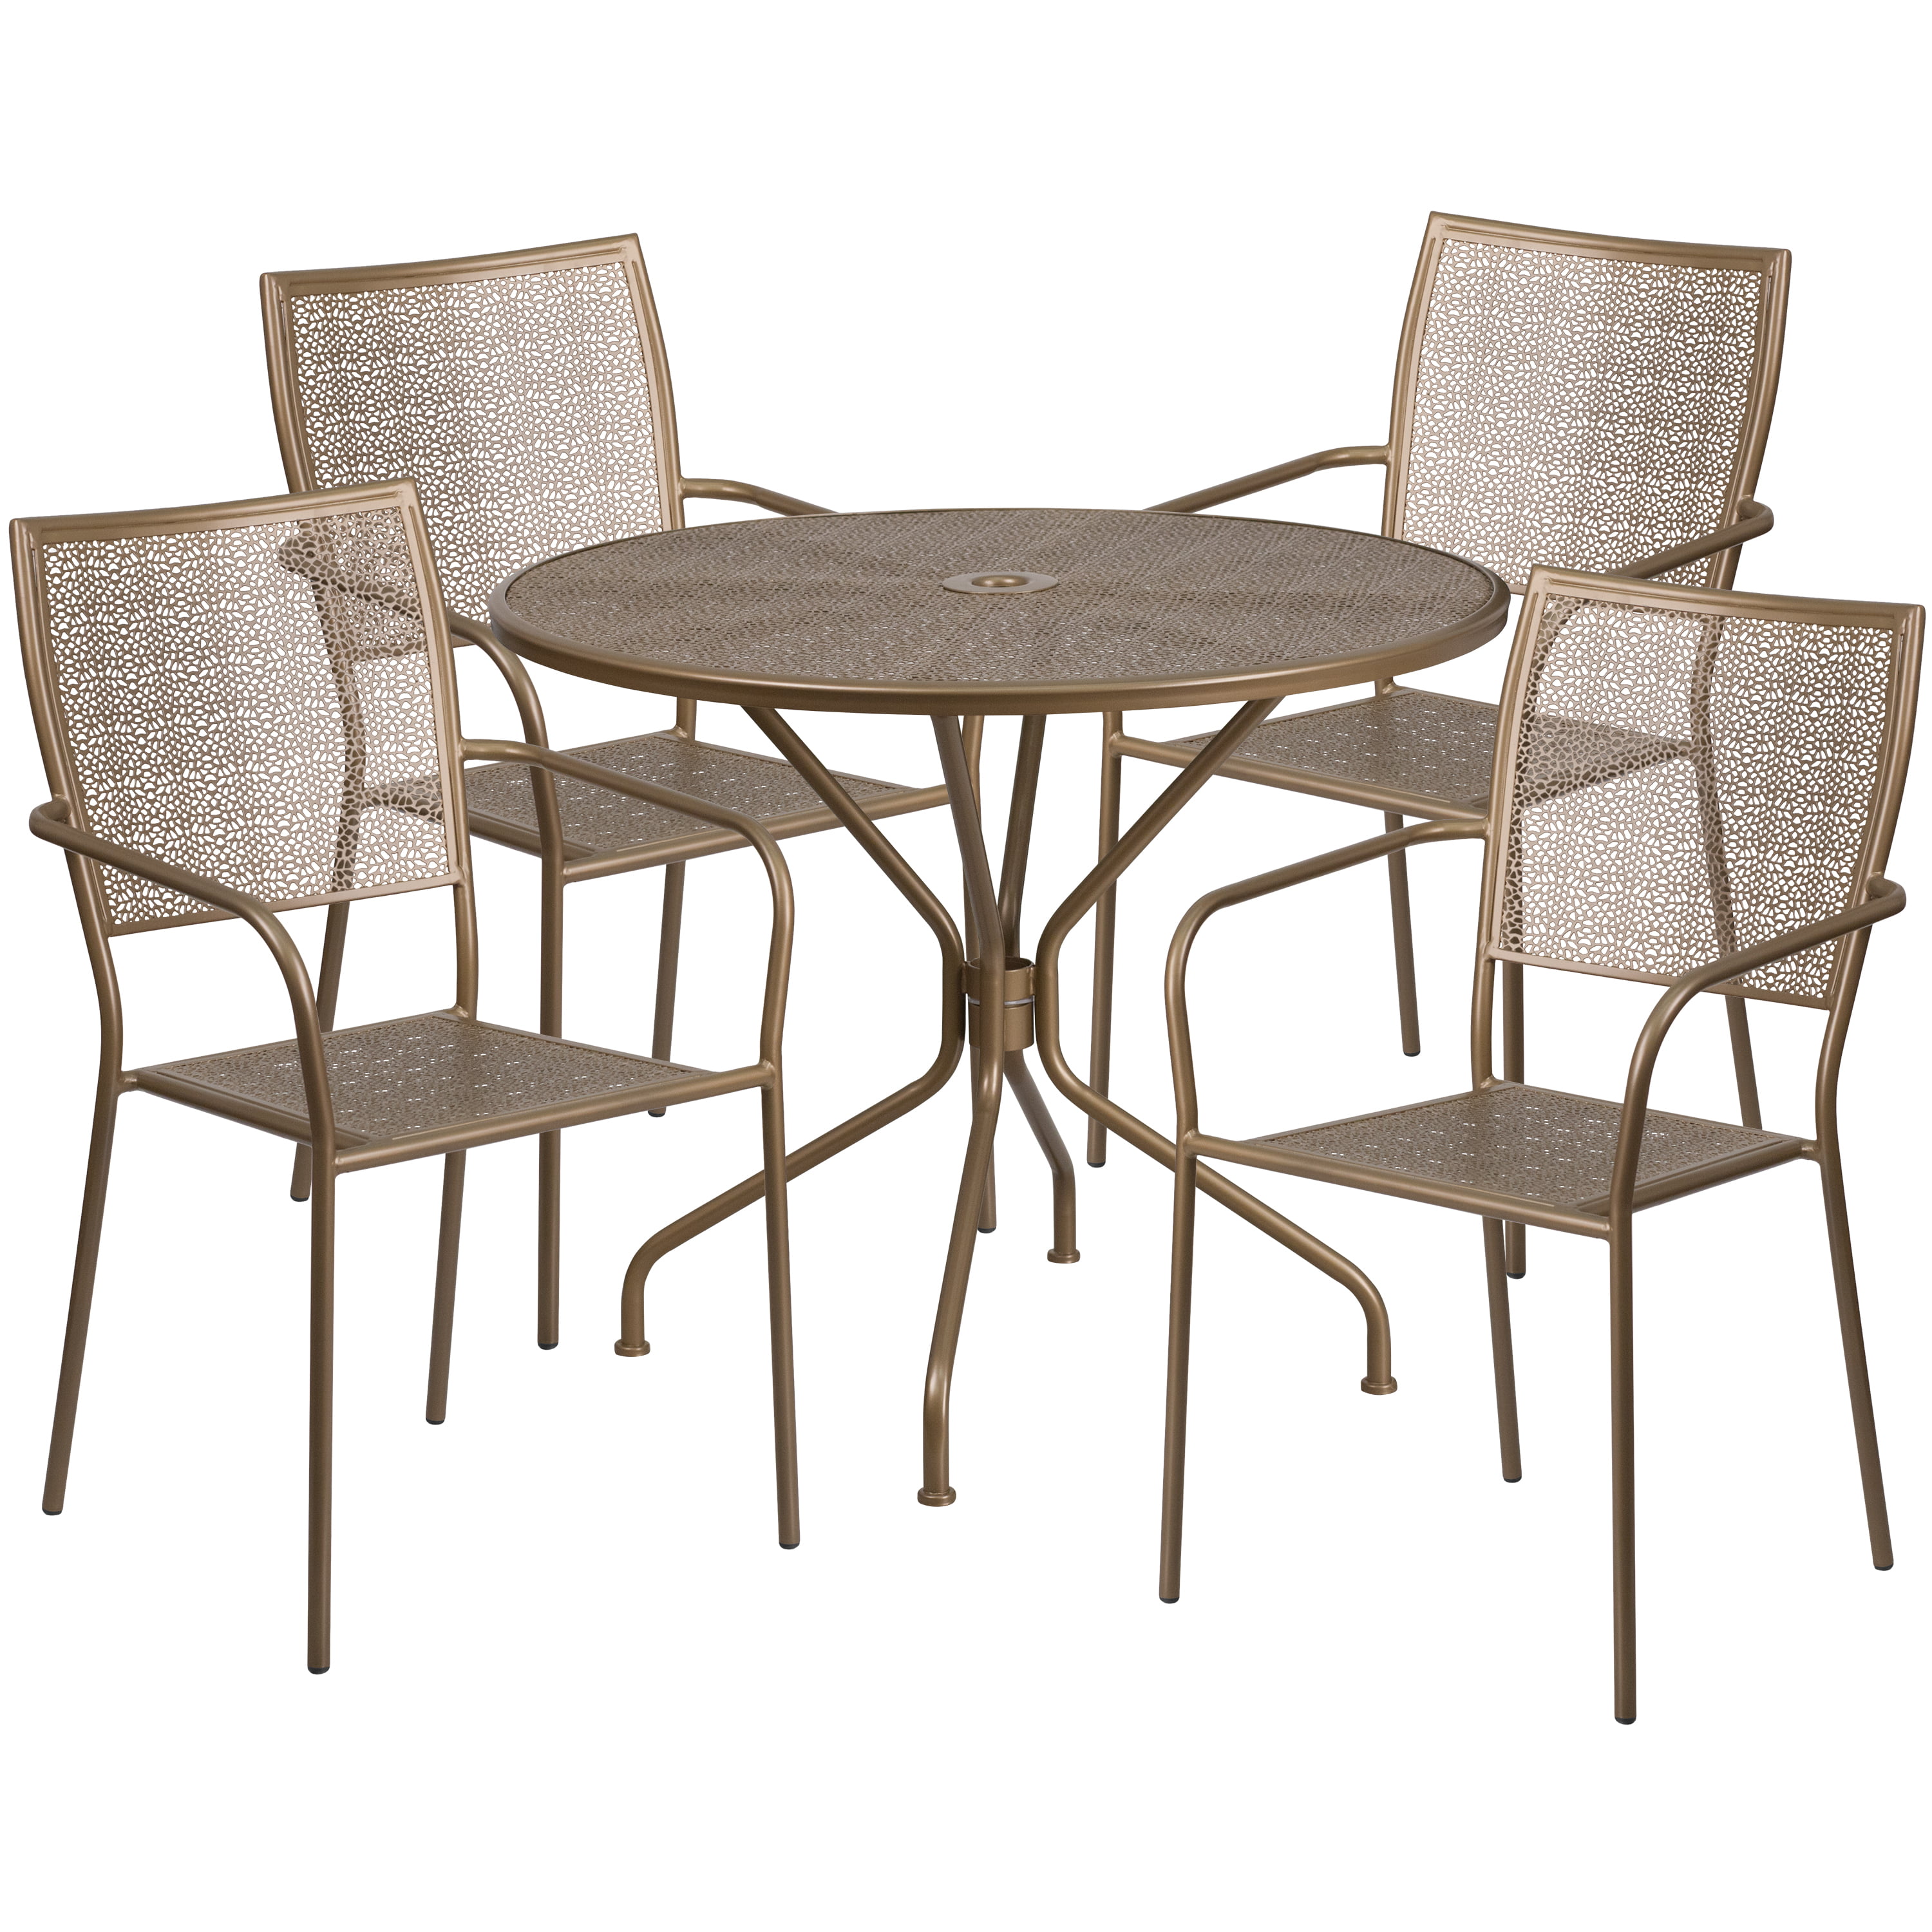 Flash Furniture Commercial Grade 35.25" Round Gold Indoor-Outdoor Steel Patio Table Set with 4 Square Back Chairs - image 2 of 5